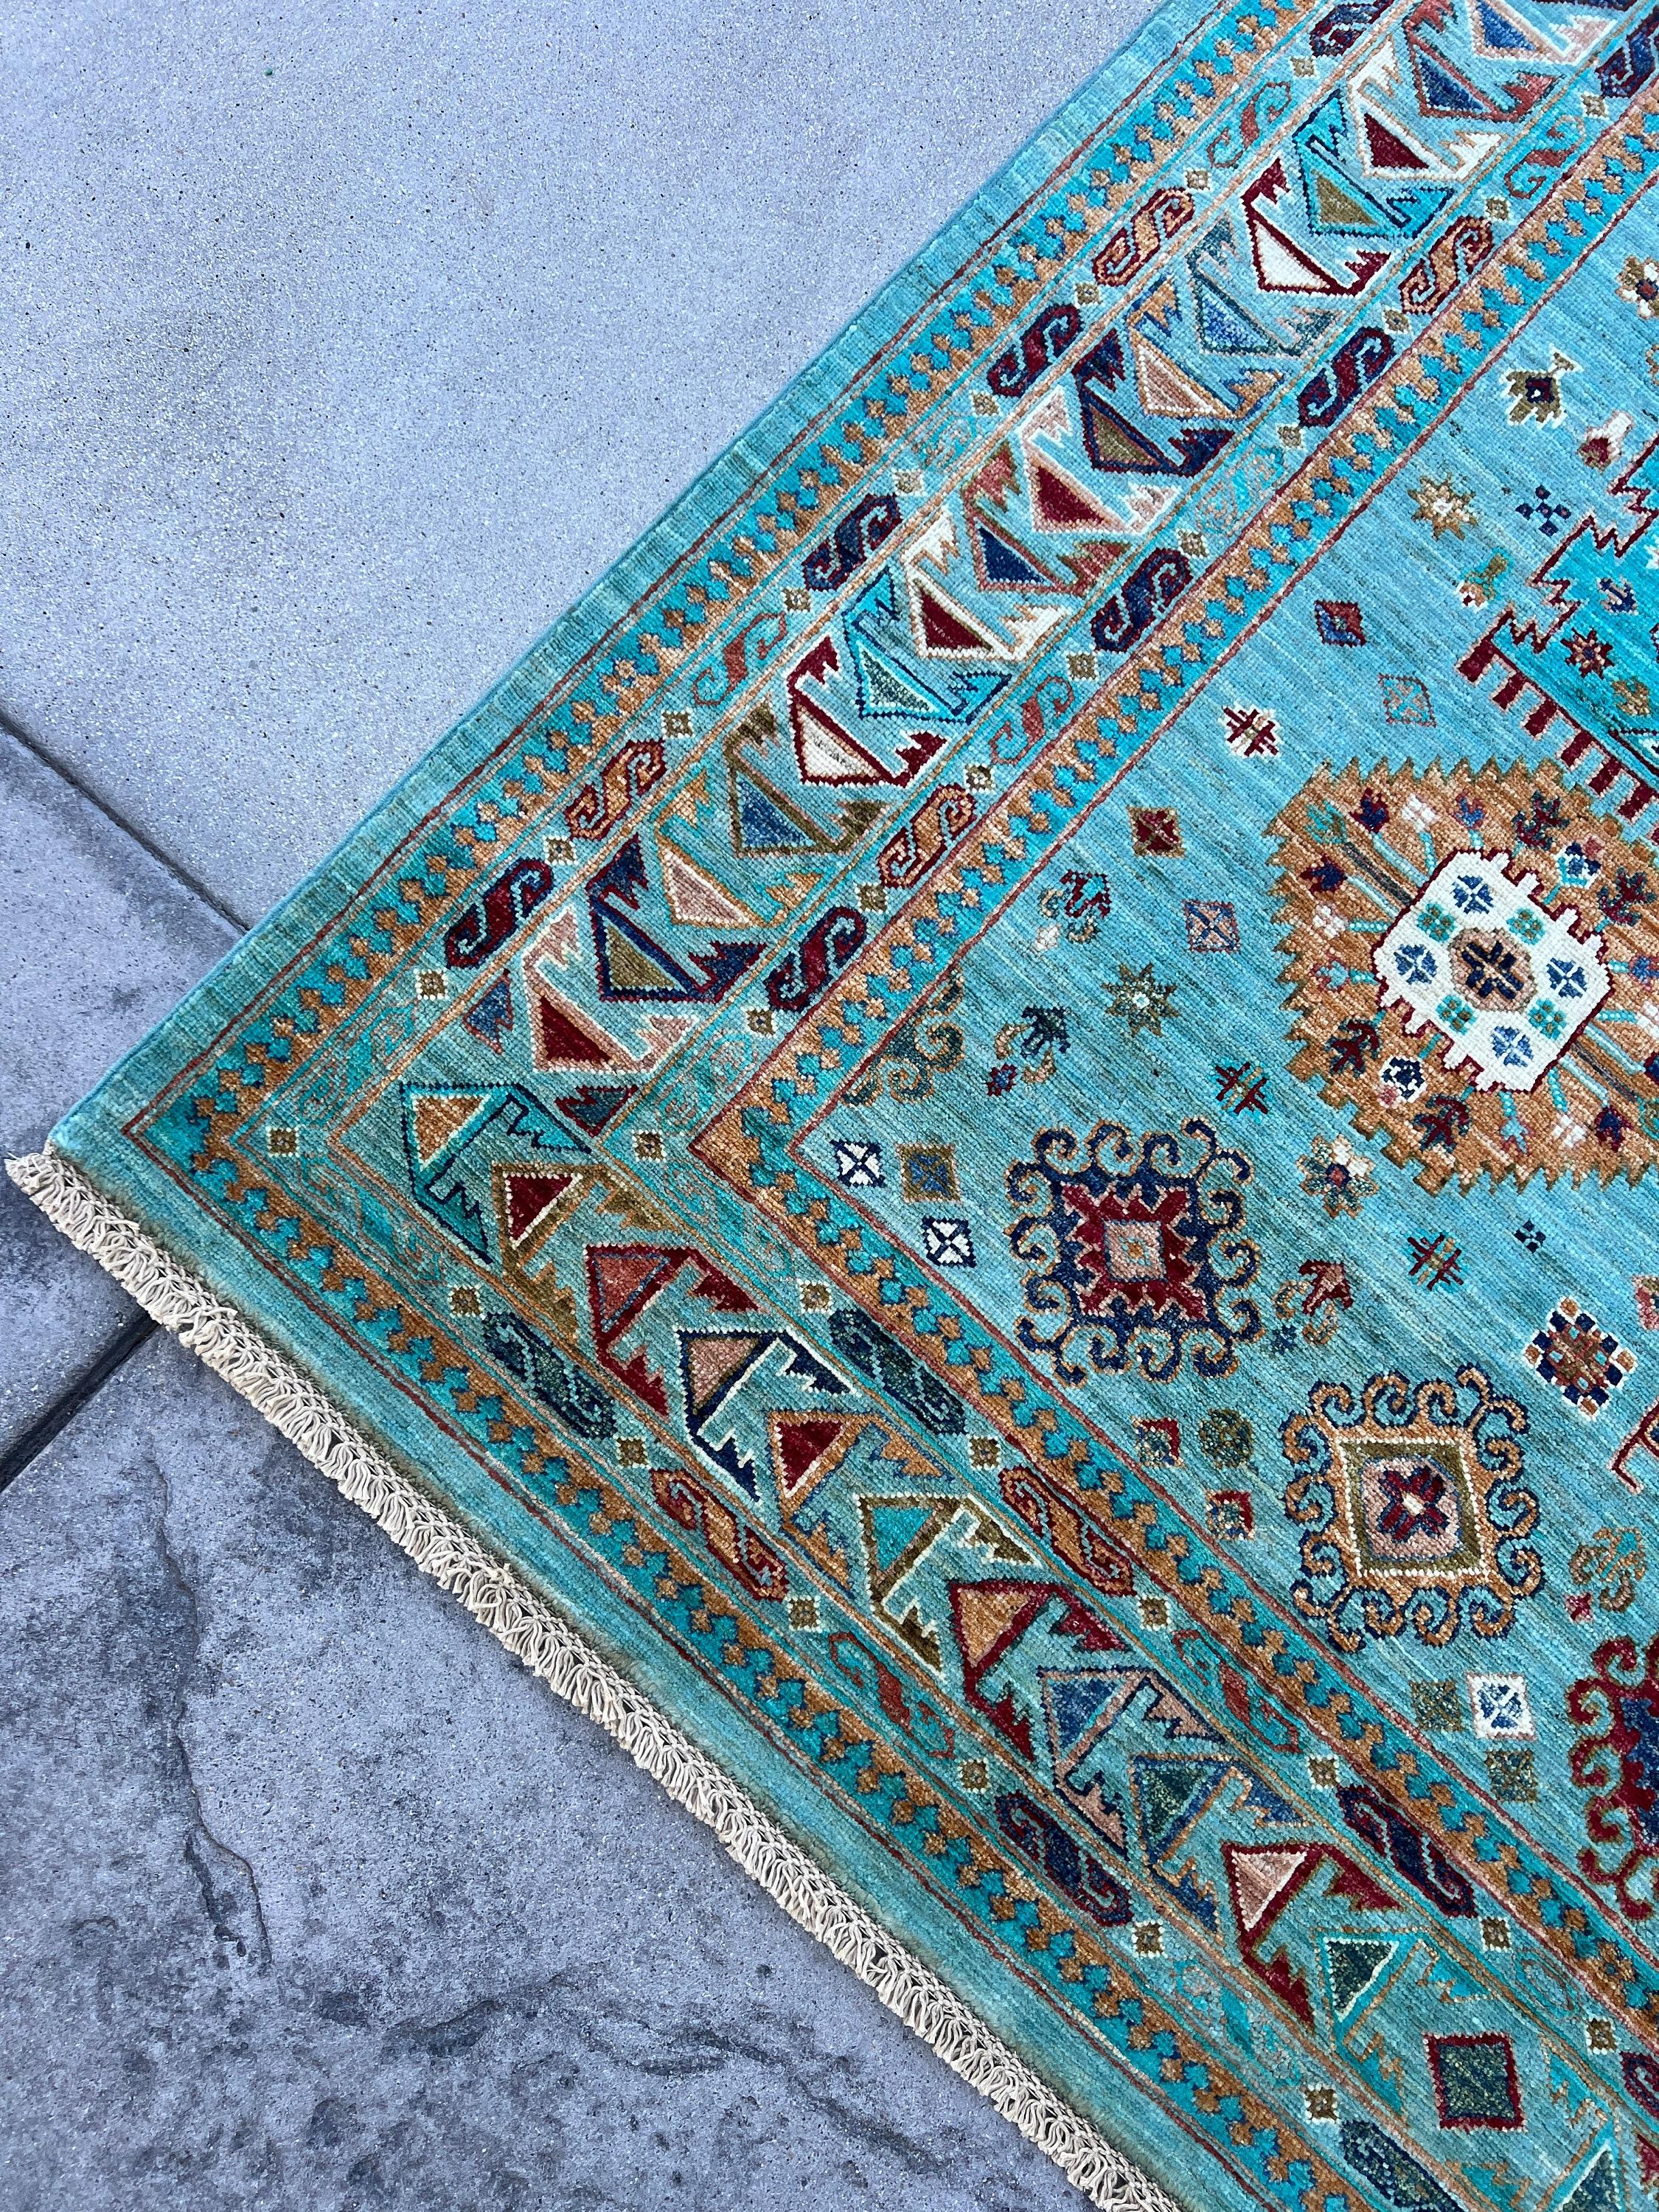 7x8 Hand-Knotted Afghan Rug Premium Hand-Spun Afghan Wool Fair Trade Turquoise  For Sale 4